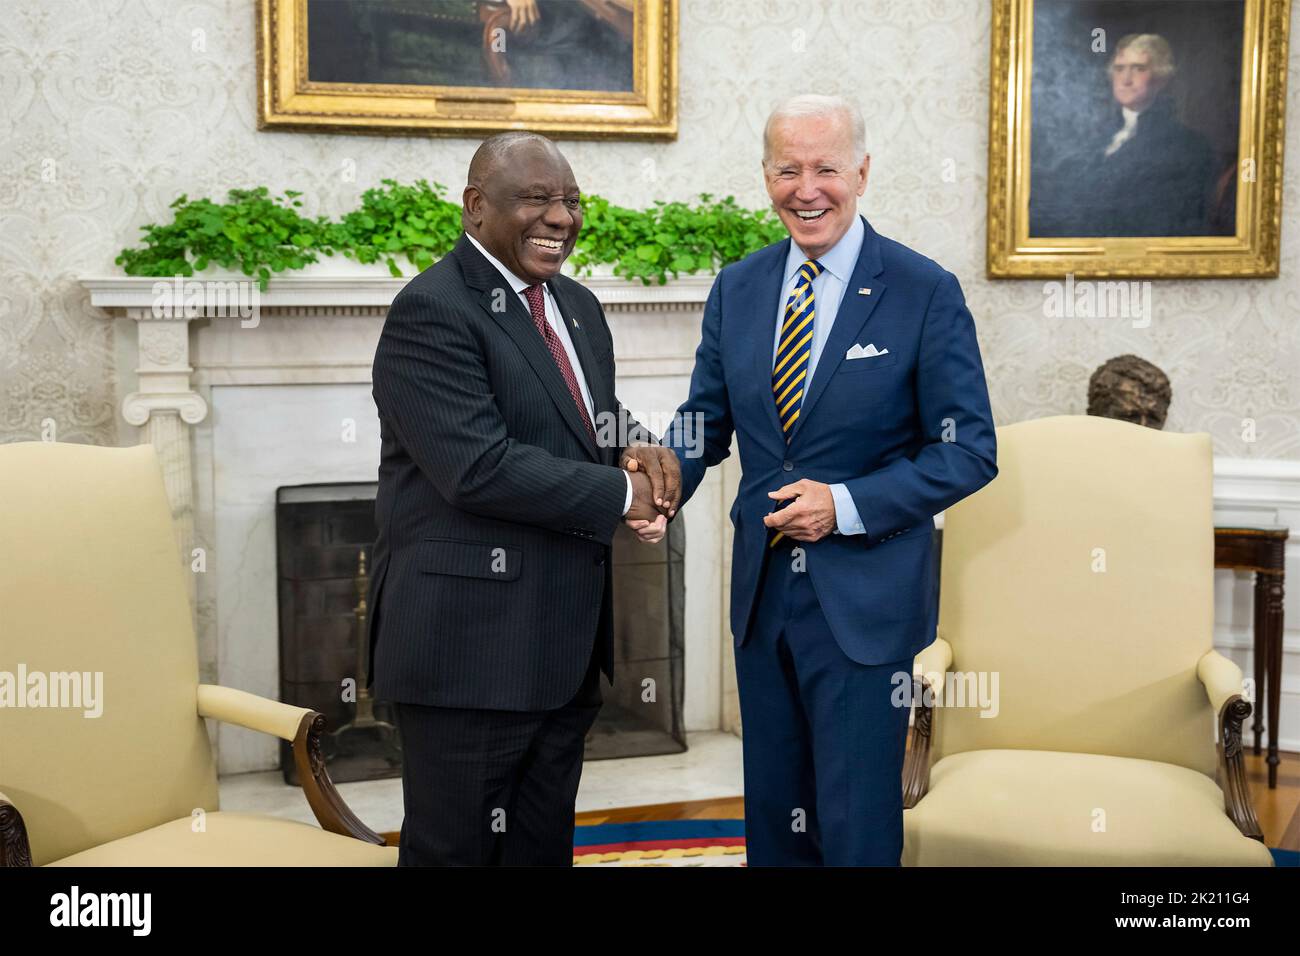 Washington, United States of America. 16 September, 2022. U.S President Joe Biden, welcomes South African President Cyril Ramaphosa before their bilateral face-to-face meeting at the Oval Office of the White House, September 16, 2022 in Washington, D.C. Stock Photo